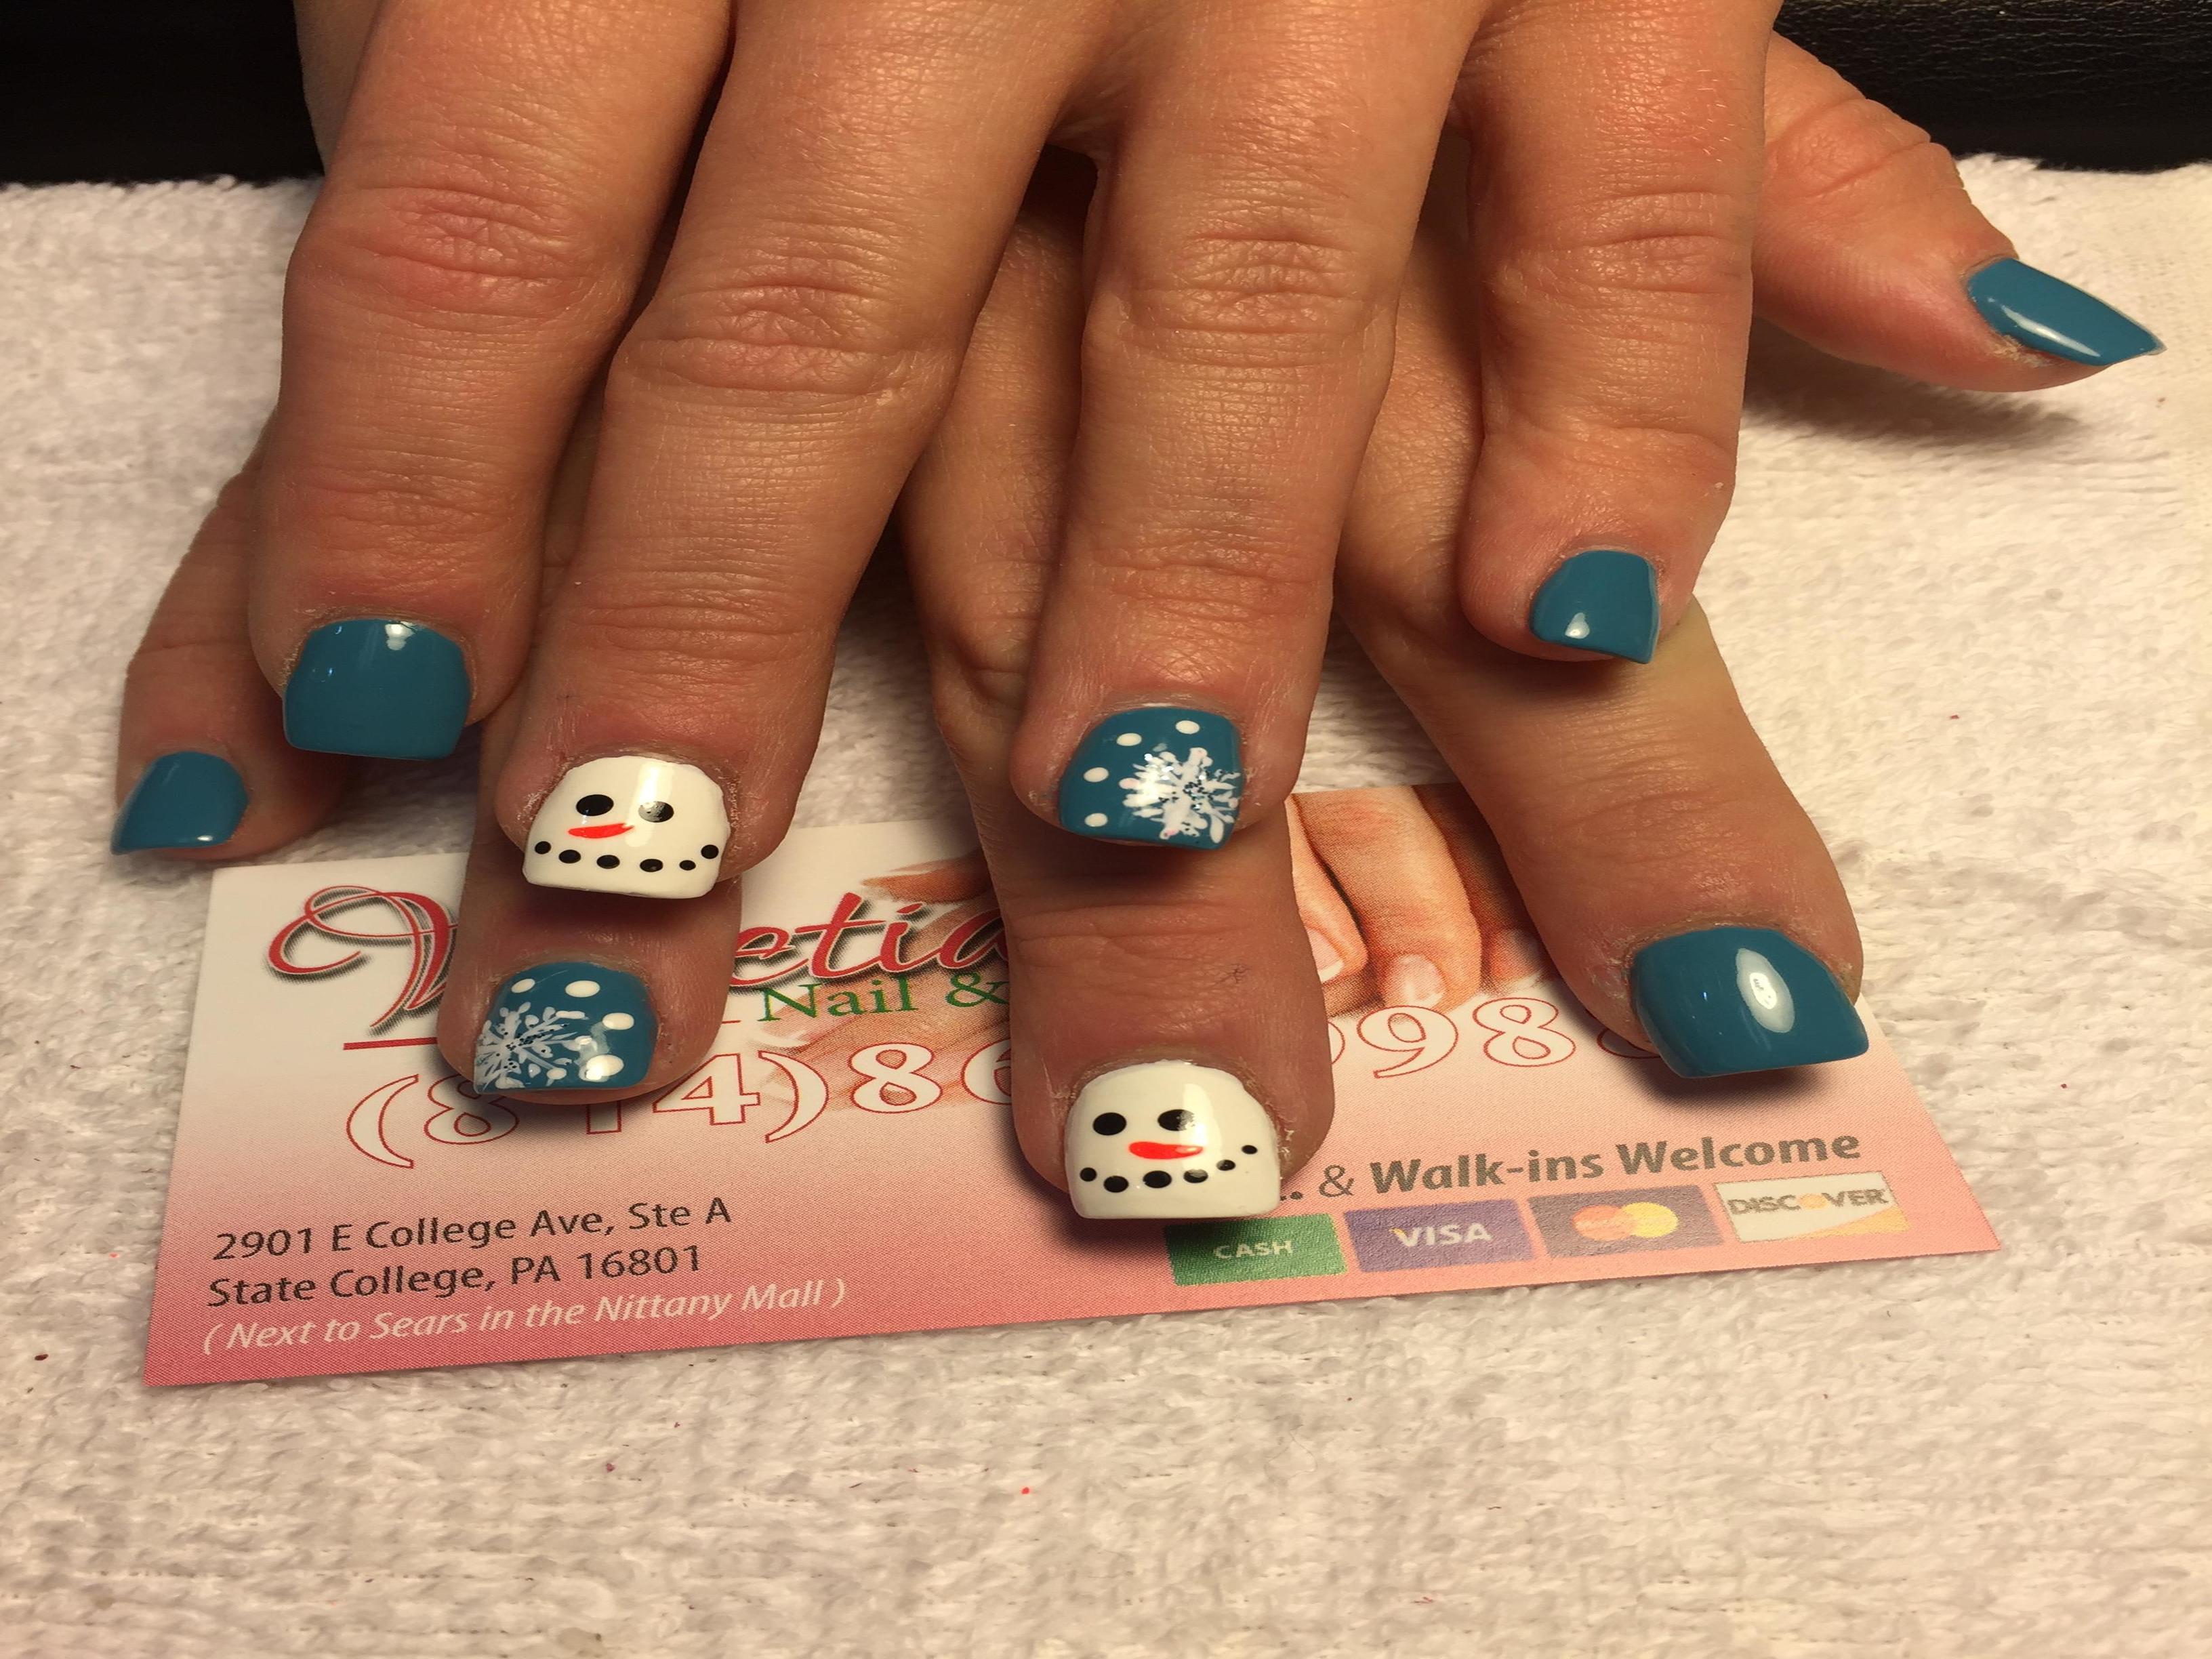 3. Creative Nails - wide 7